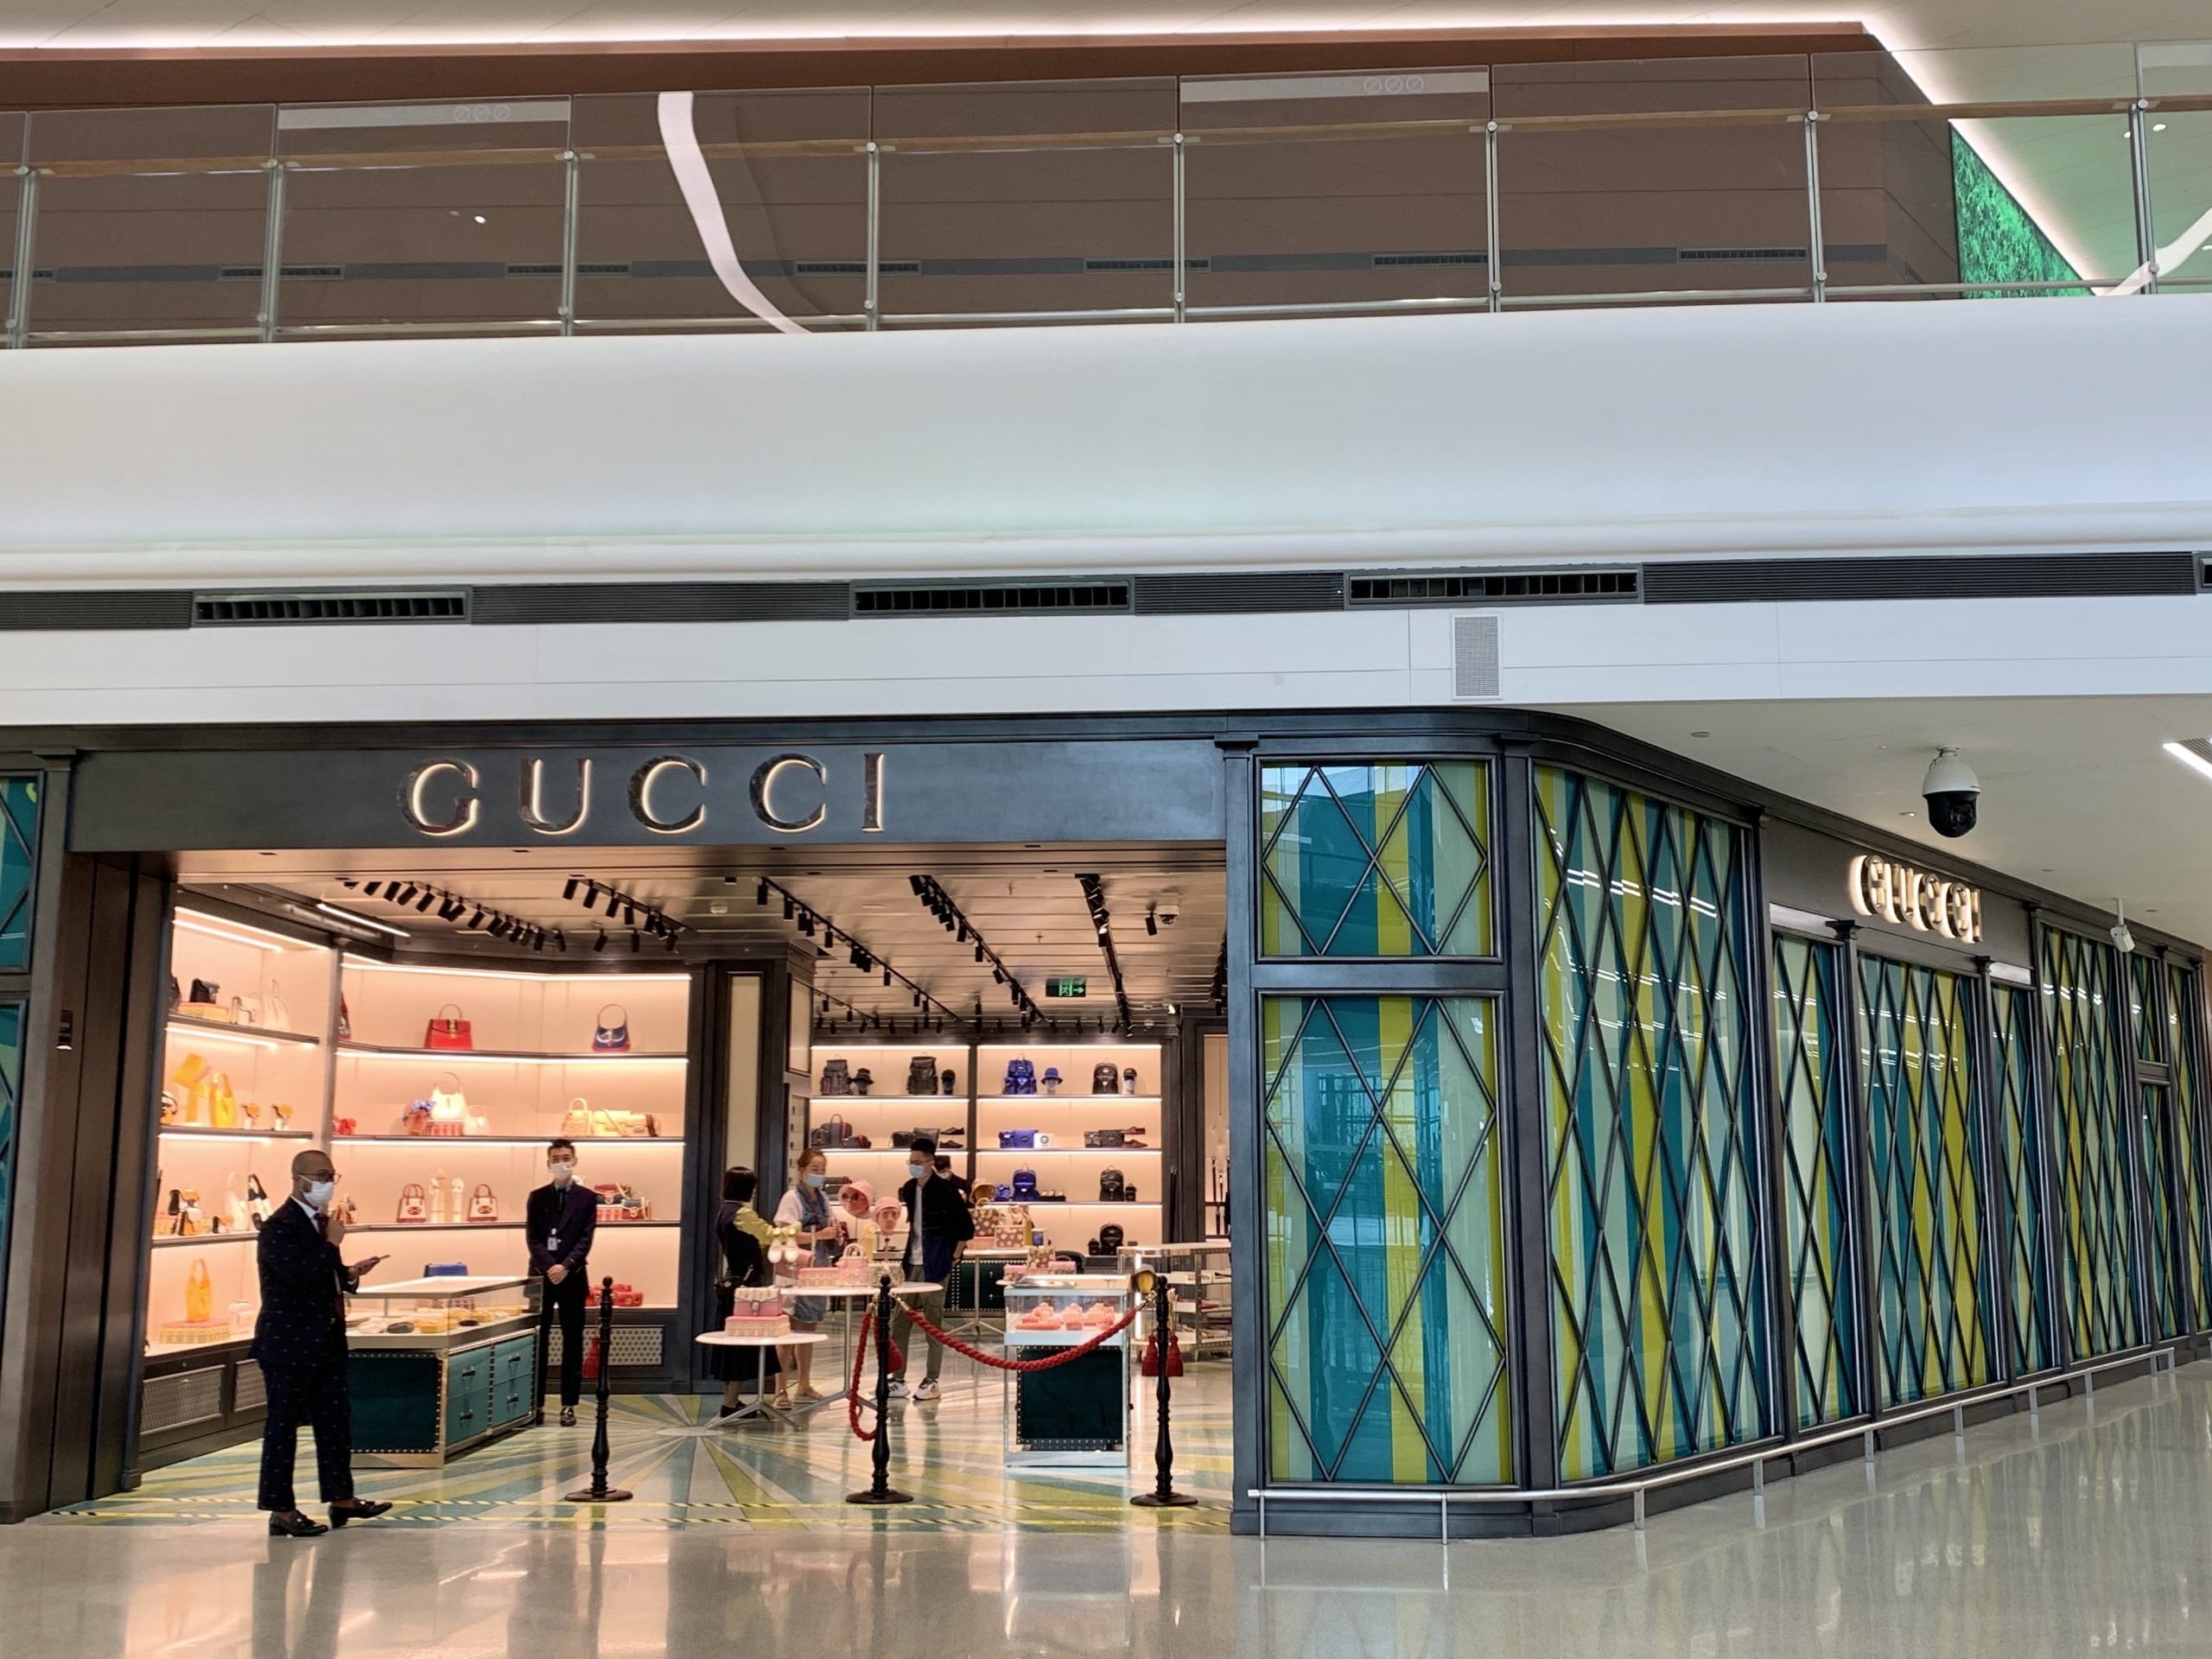 A Firsthand View of the Luxury Retail Stores at Chengdu Tianfu  International Airport - Luxe.CO